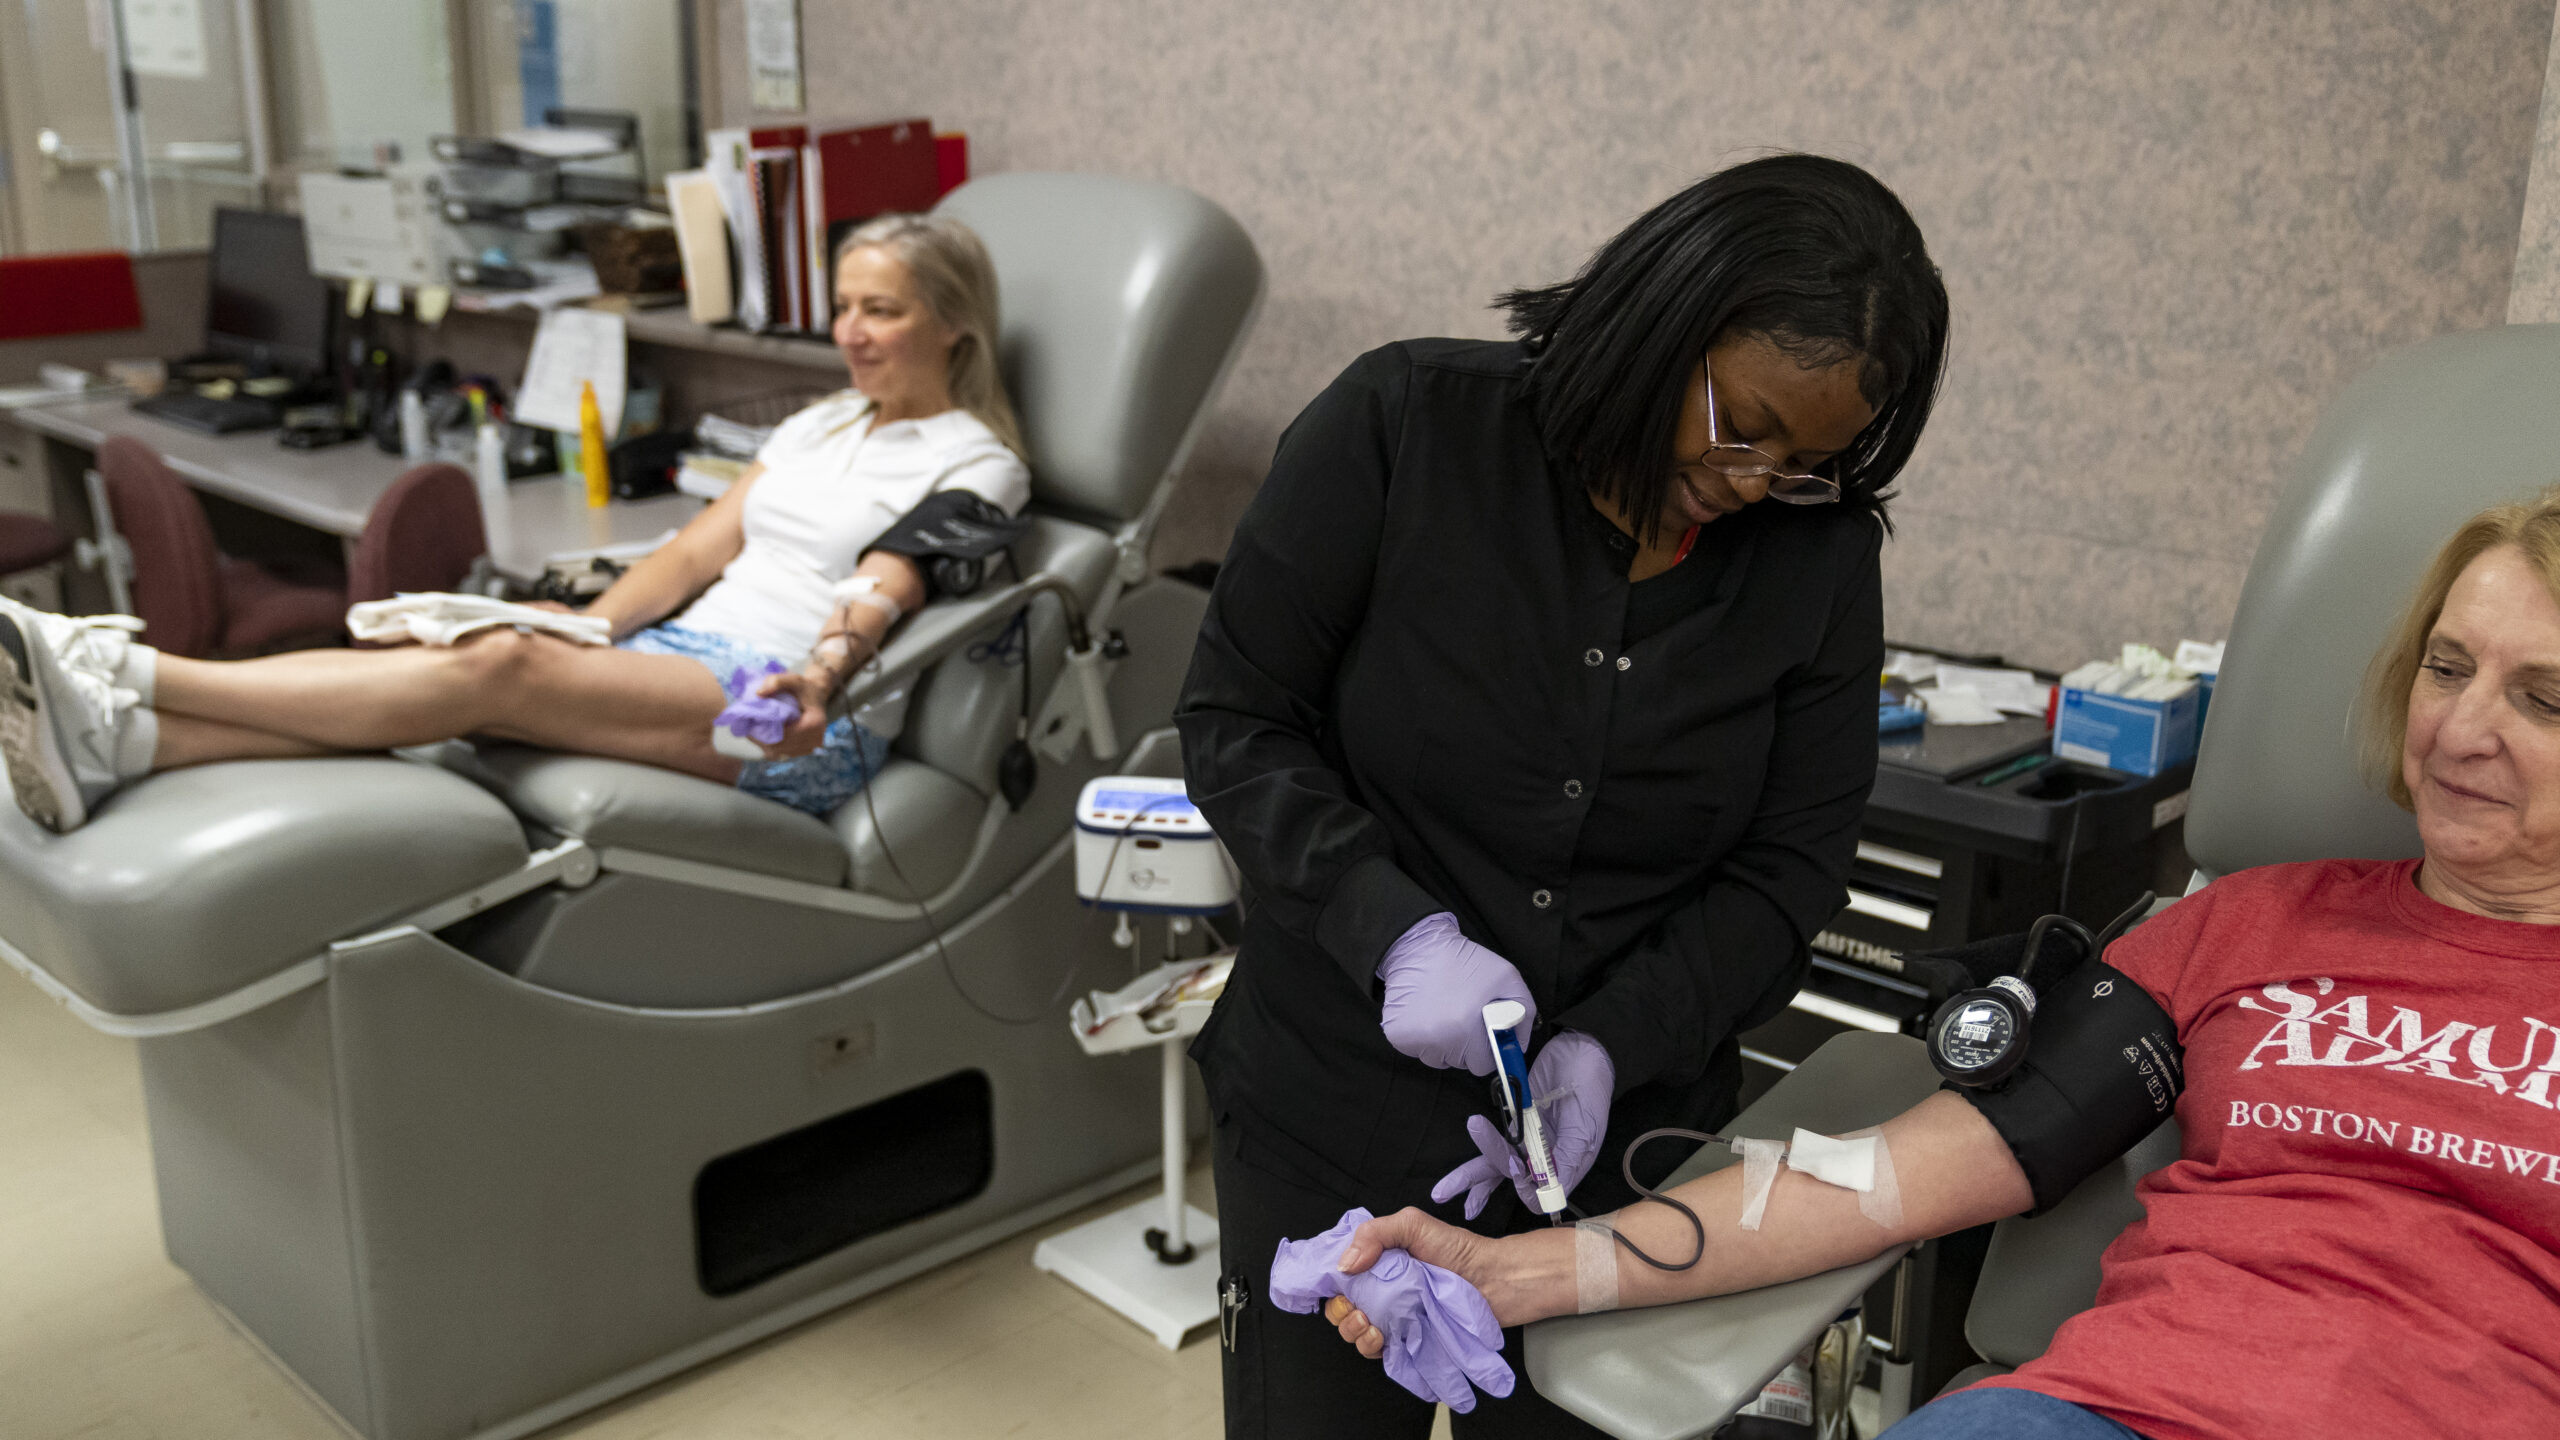 Red Cross declares an emergency blood shortage, as number of donors hits 20-year low